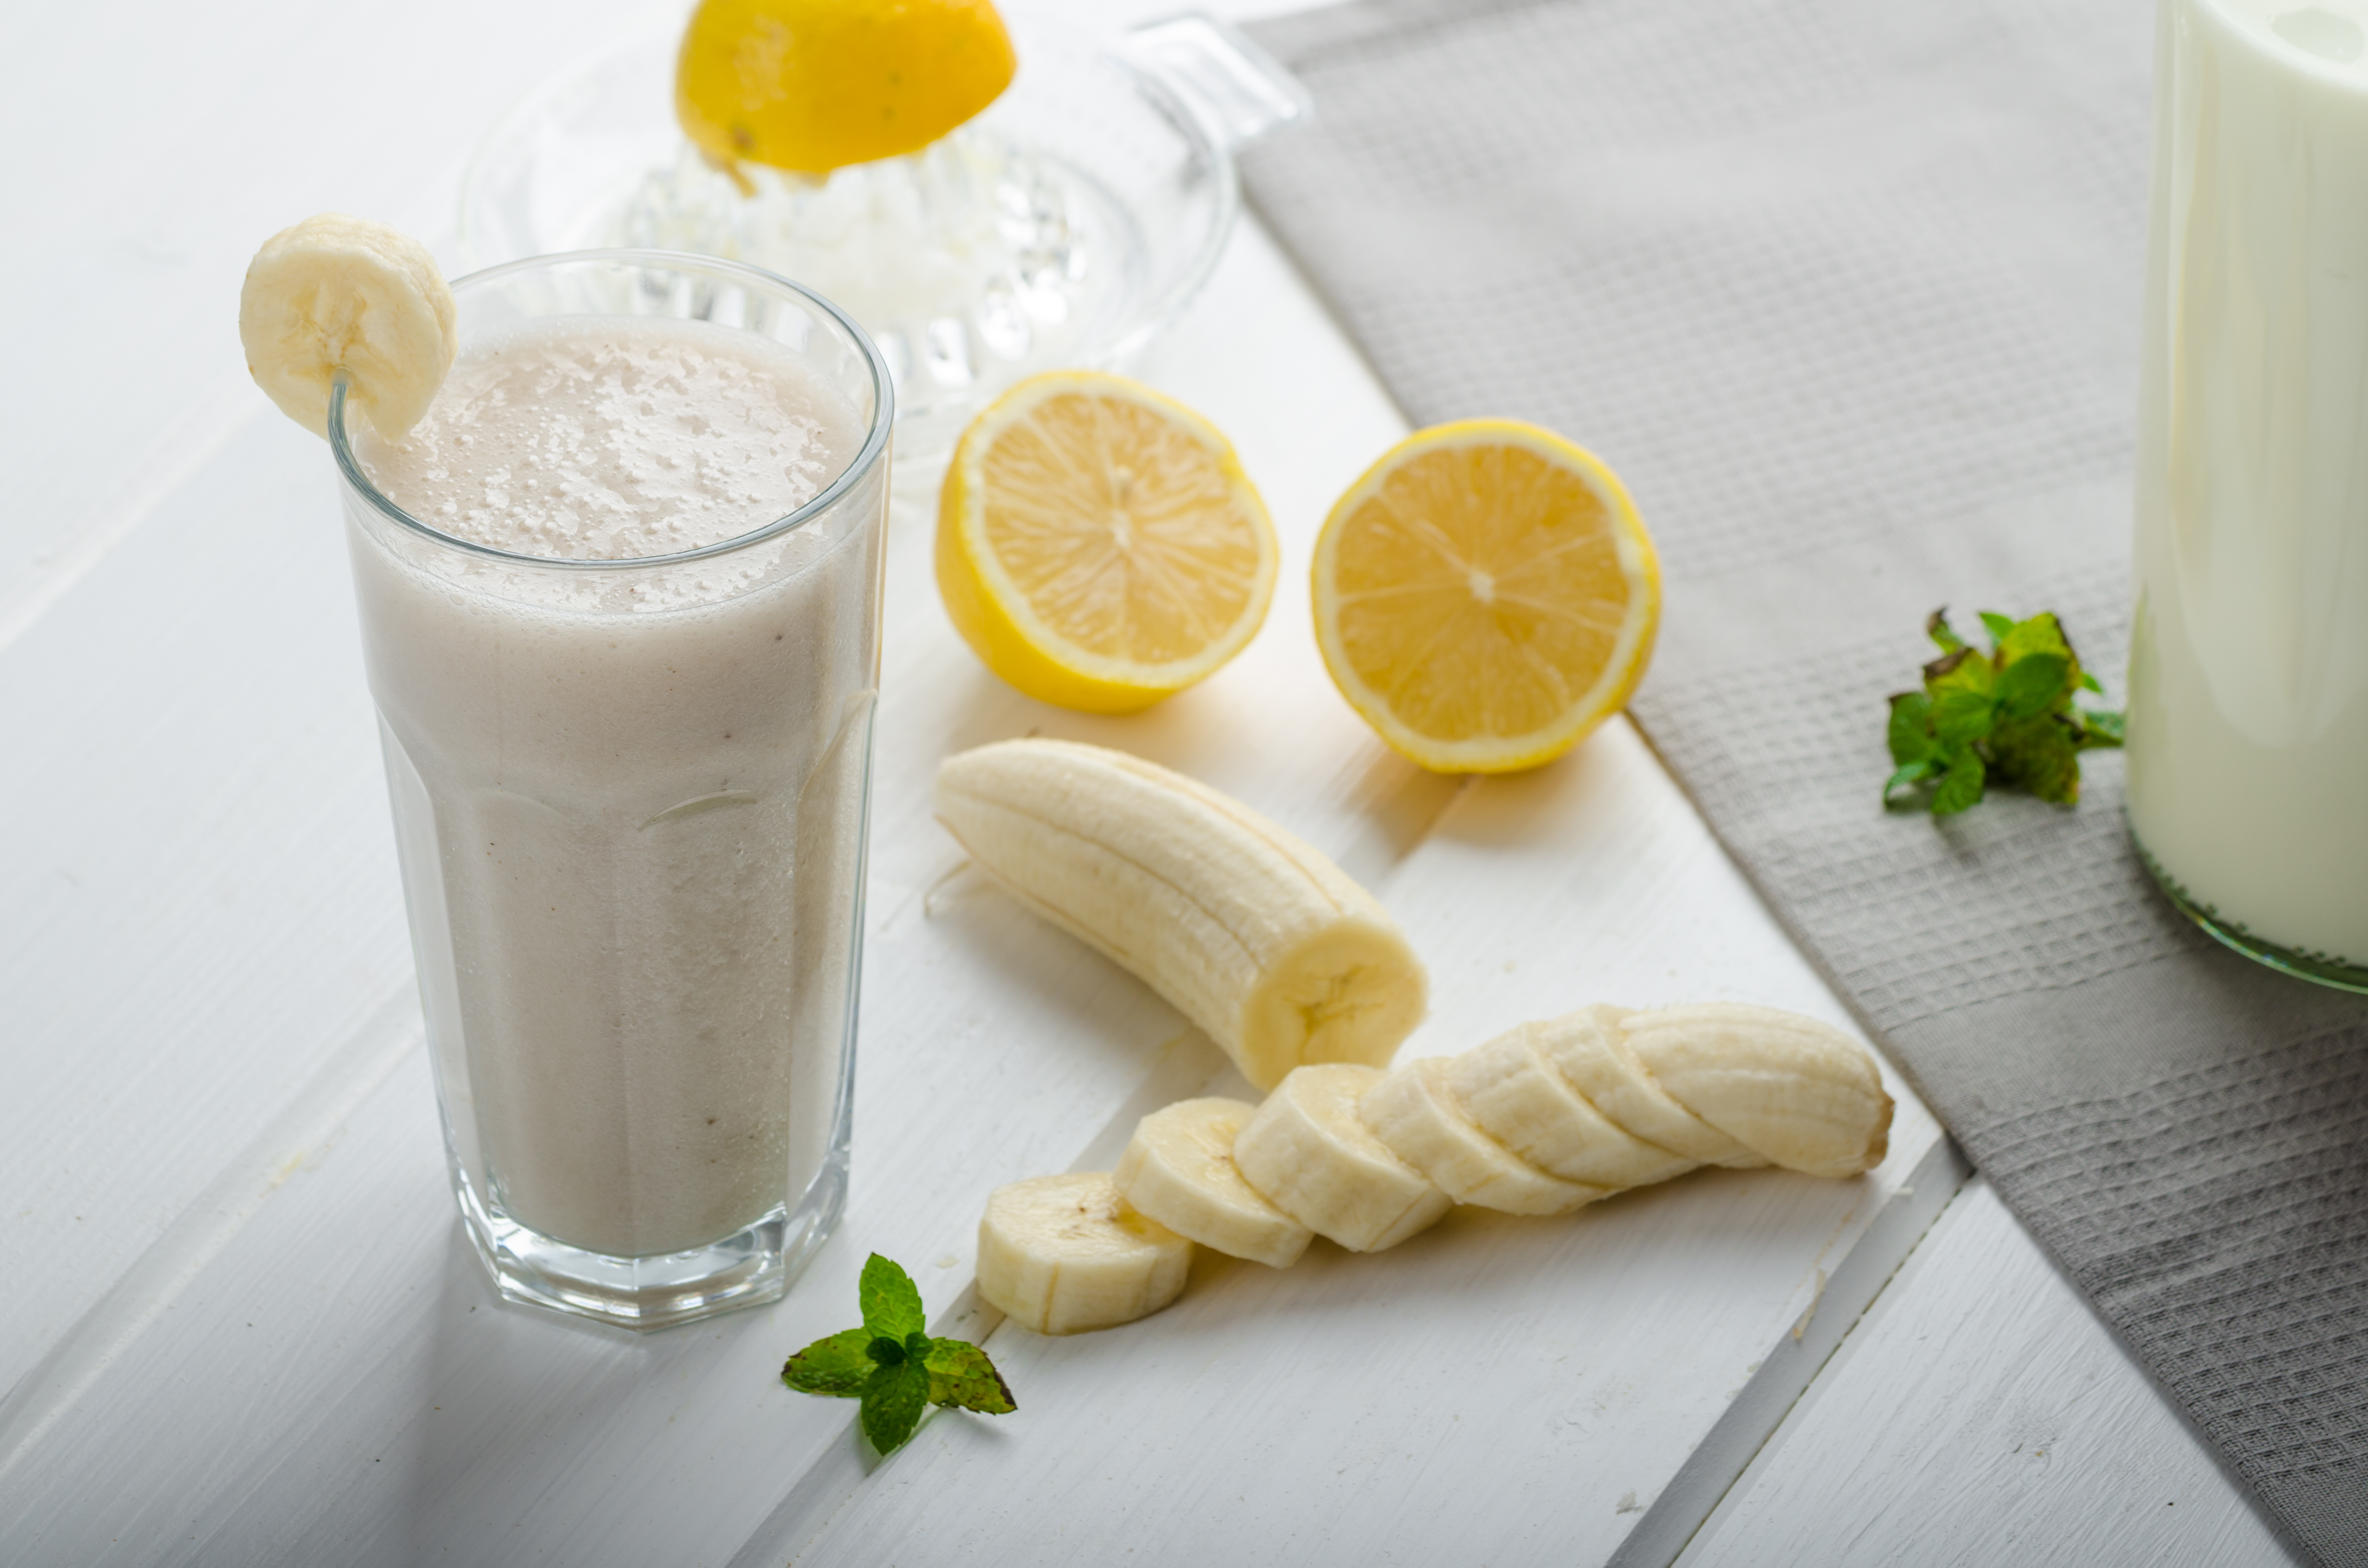 Homemade banana smoothie with lemons, herbs and organic milk from the farm